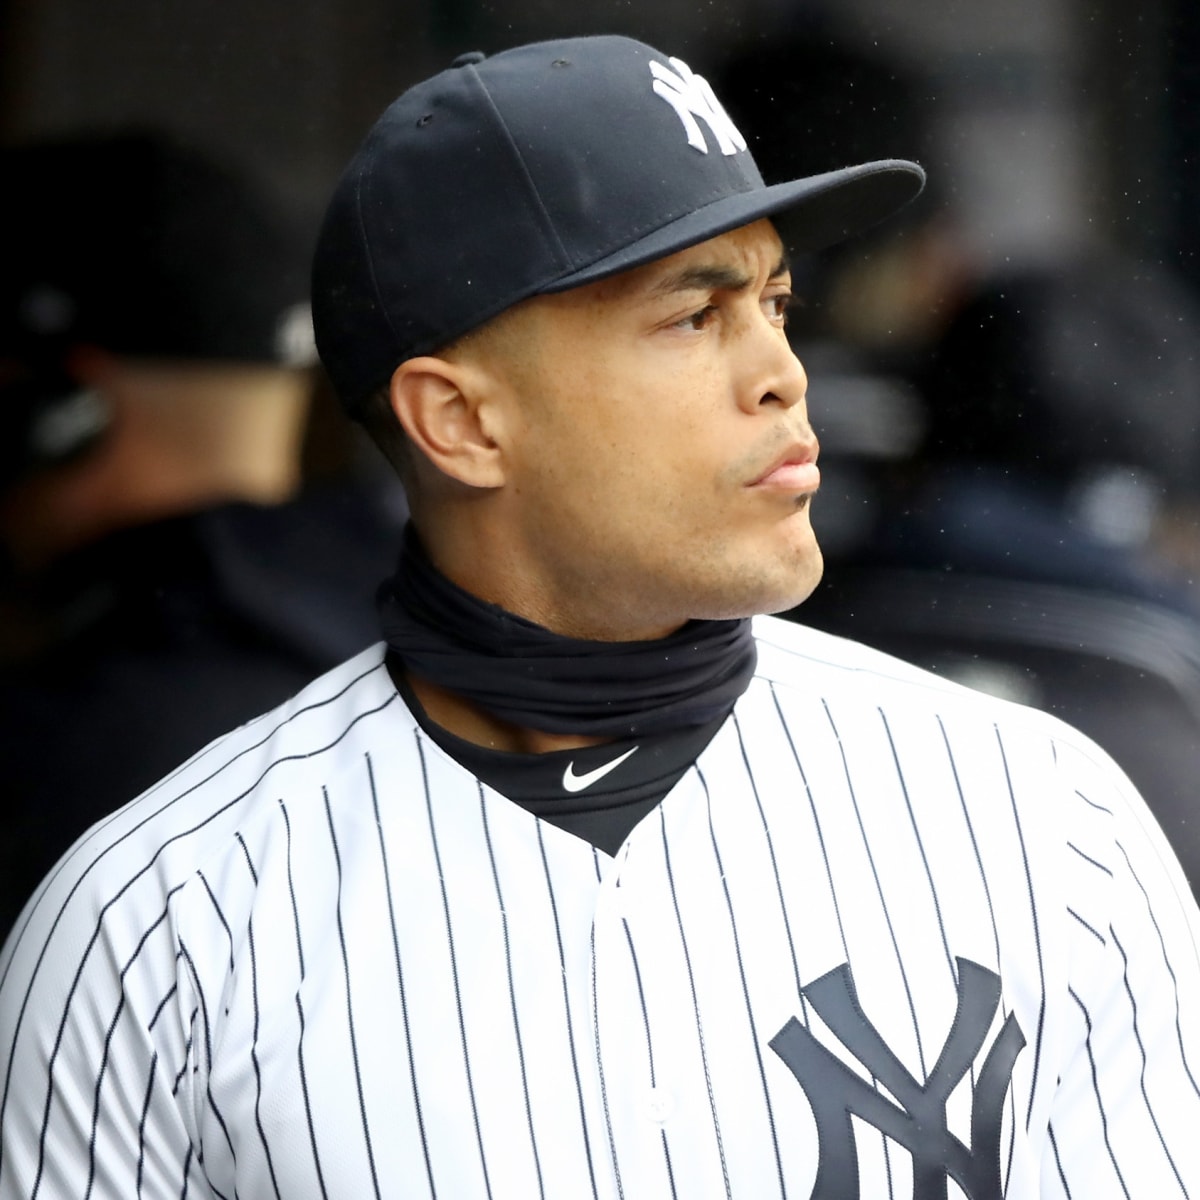 New York Yankees fans react to report indicating Giancarlo Stanton